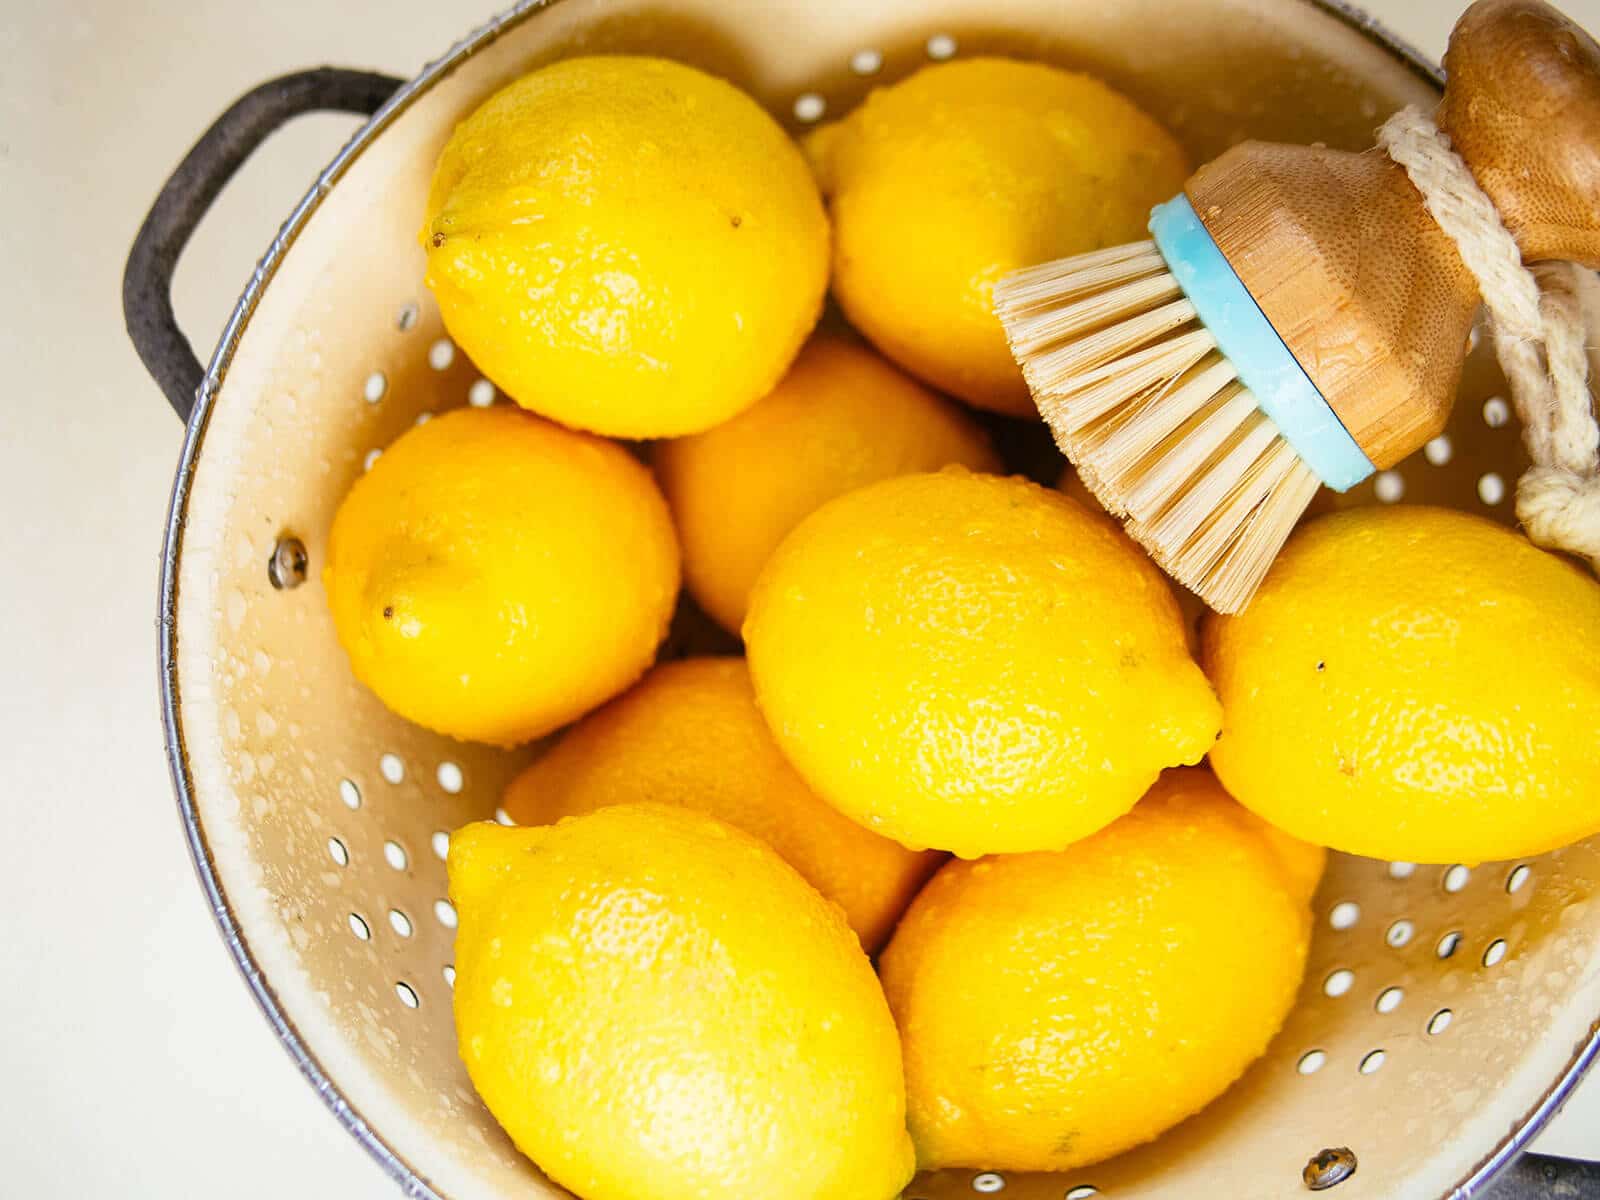 Organic lemons being washed and scrubbed in a colander